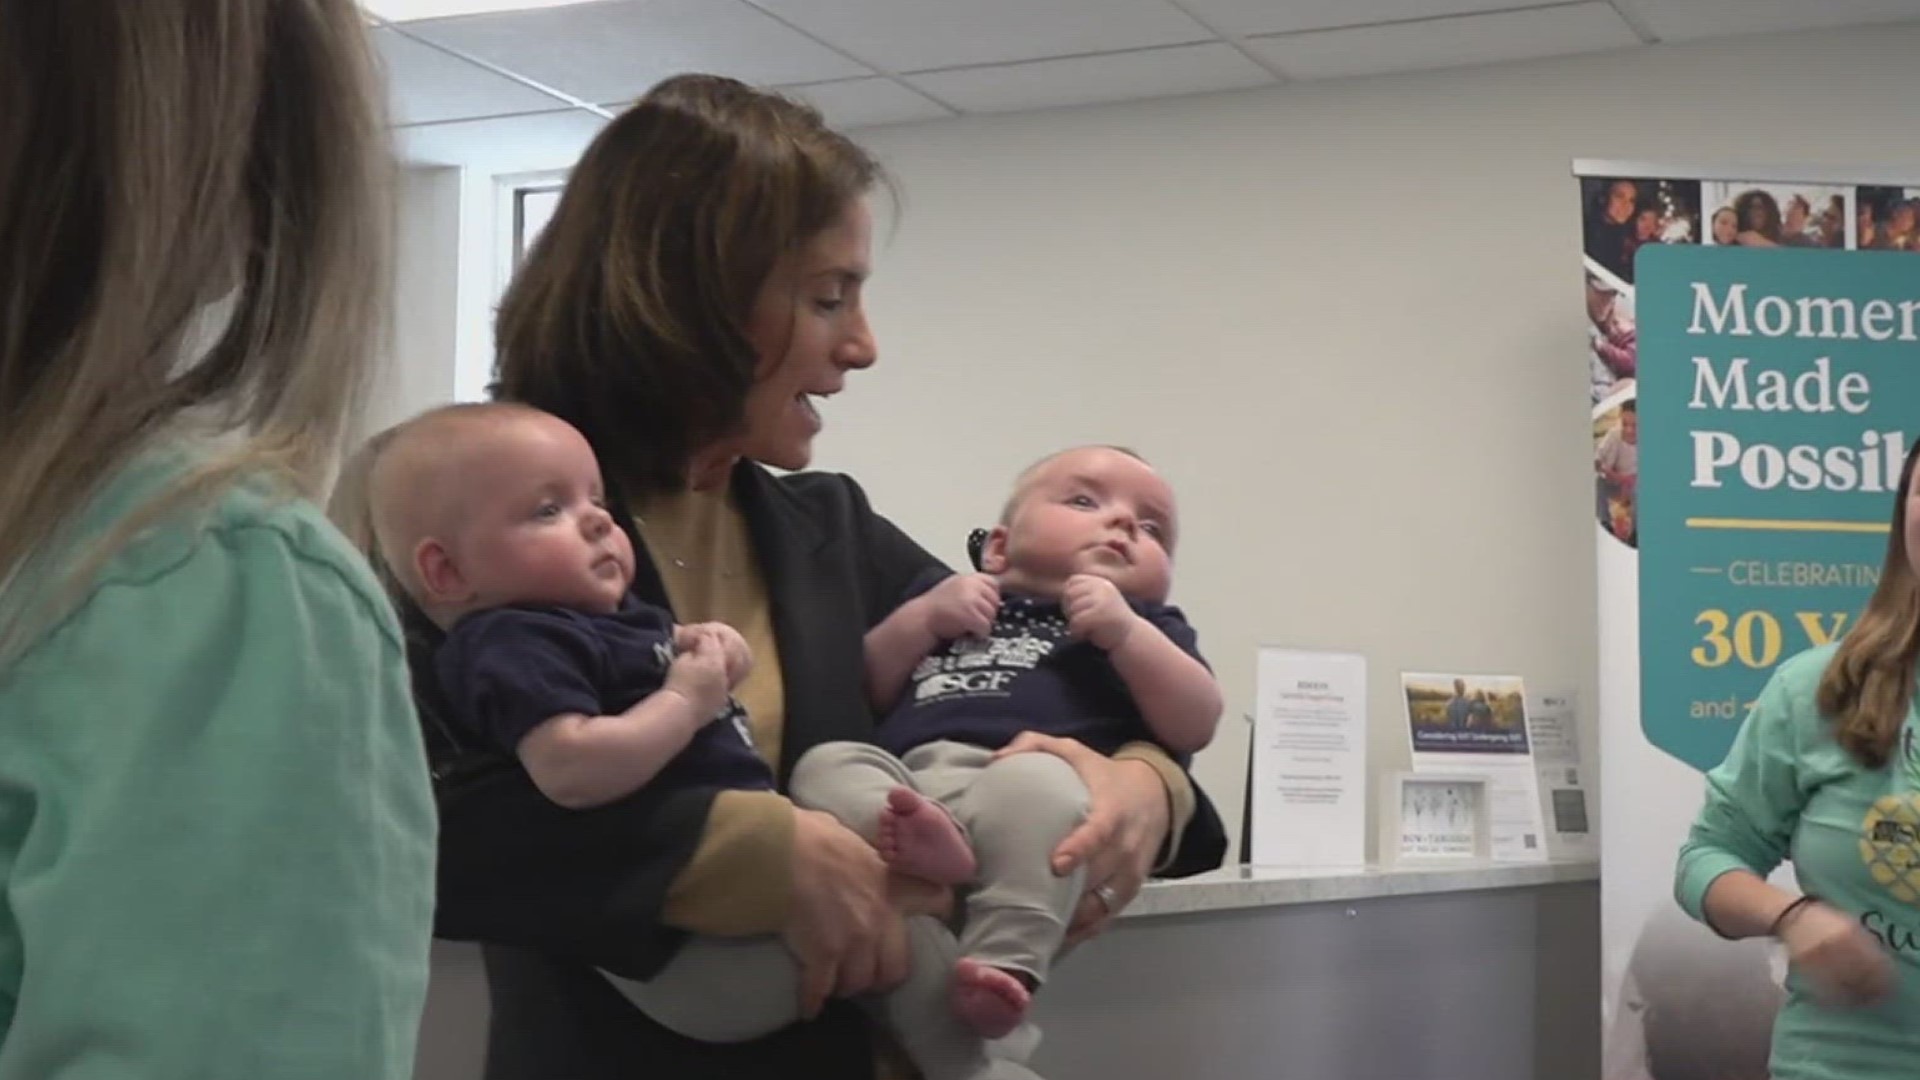 Dr. Melanie Ochalsky opened the new Shady Grove Fertility Clinic in York to address the growing need for treatment options.